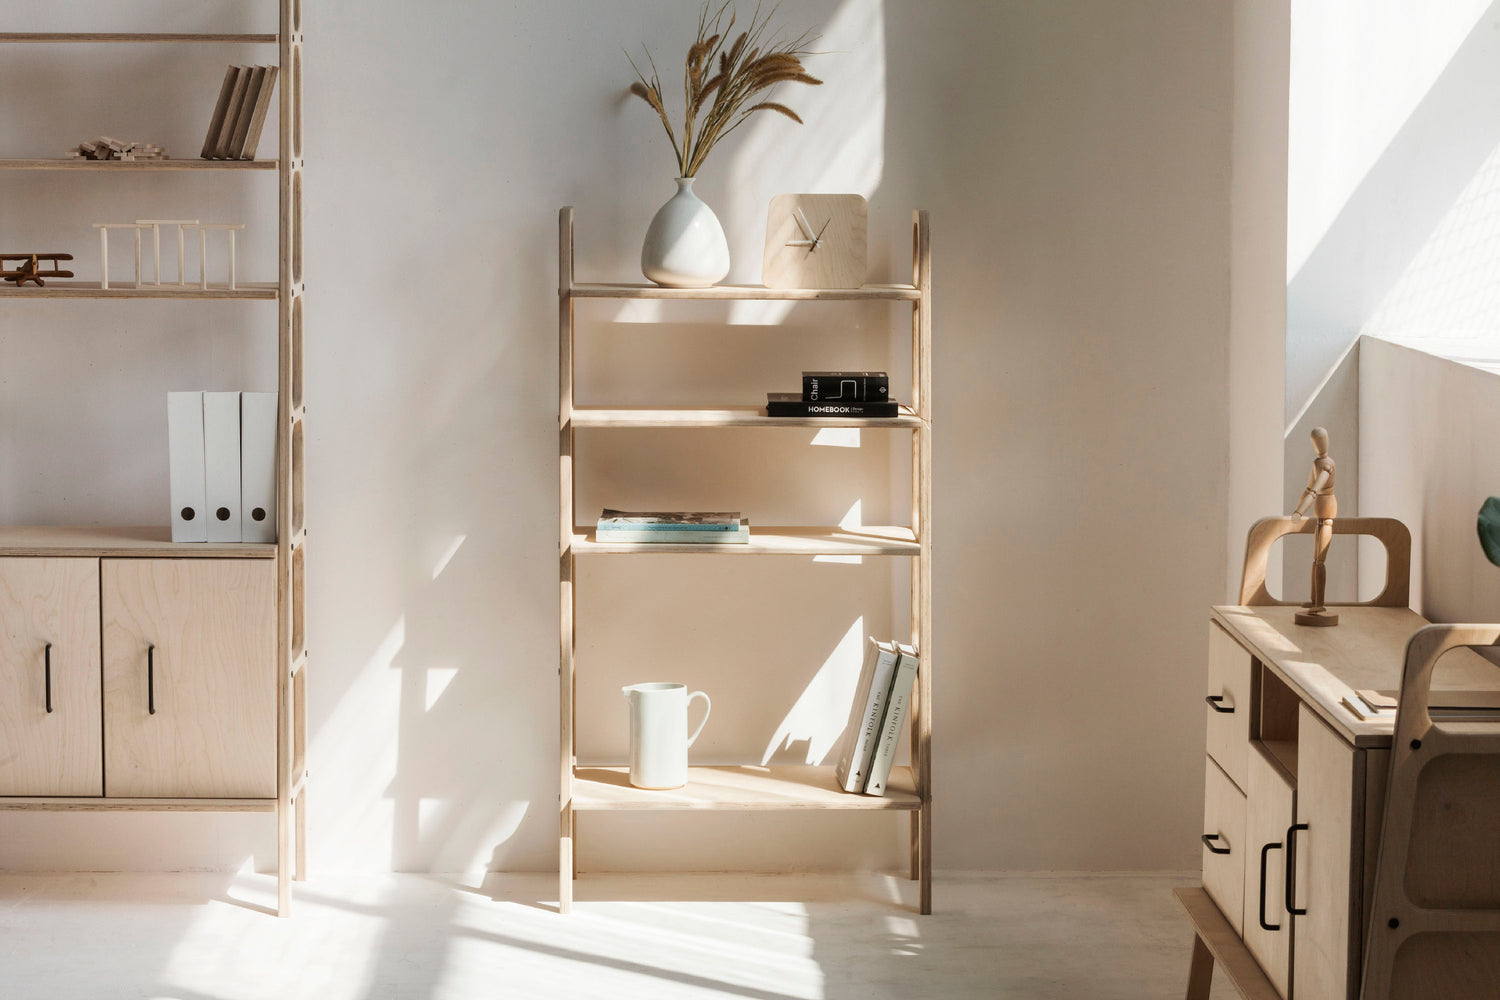 Plywood bookcases and living room shelves in the Scandinavian style